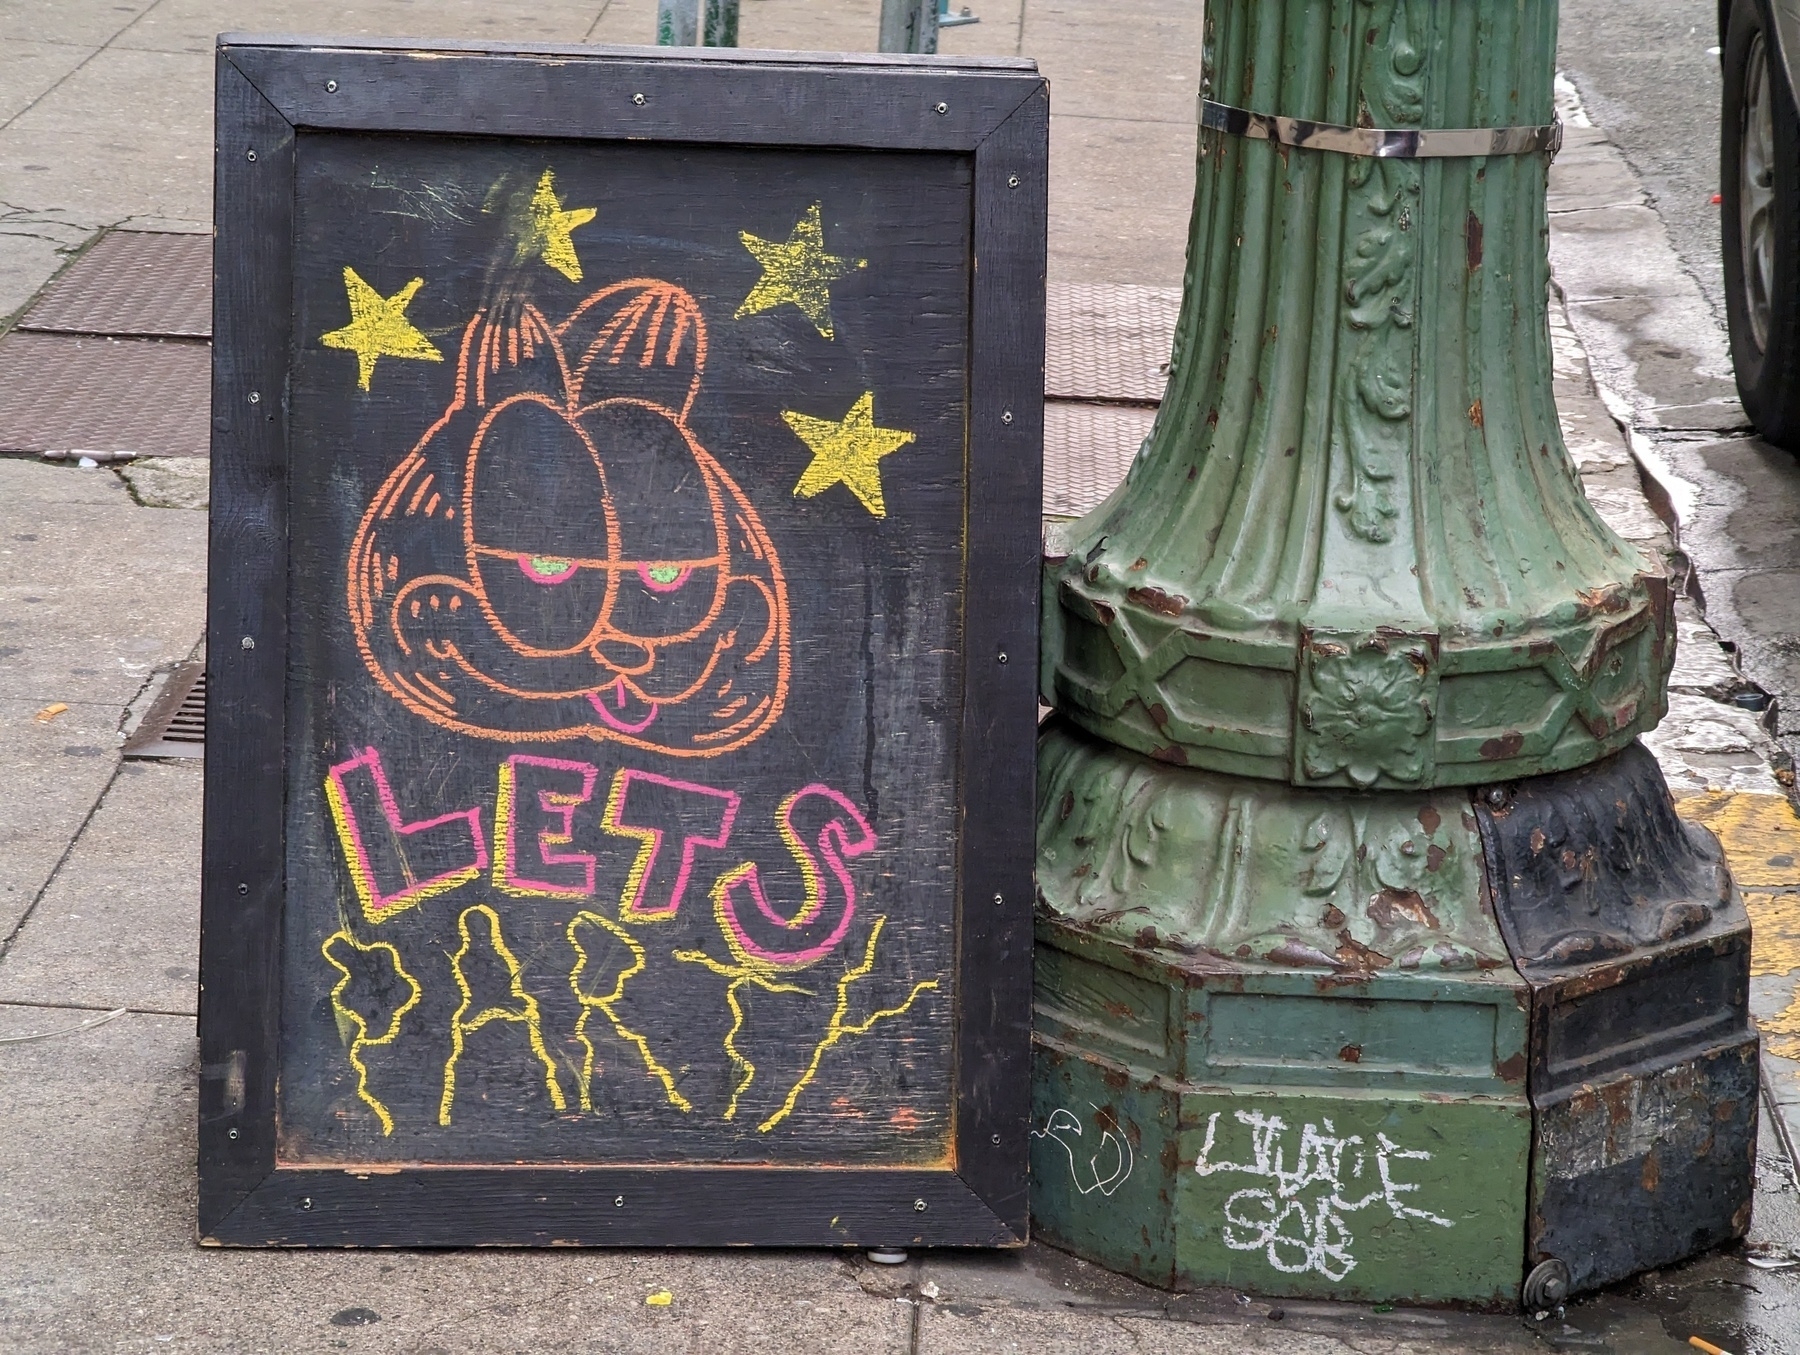 A chalkboard sandwich-board sign with a colored chalk caricature of Garfield the cat on it surrounded by solid yellow stars over the scribbled words 'let's party' rests on a sidewalk next to a green painted base of a street lamppost Sunday, March 12, 2023 in the 400 block of 14th Street in Oakland, California 